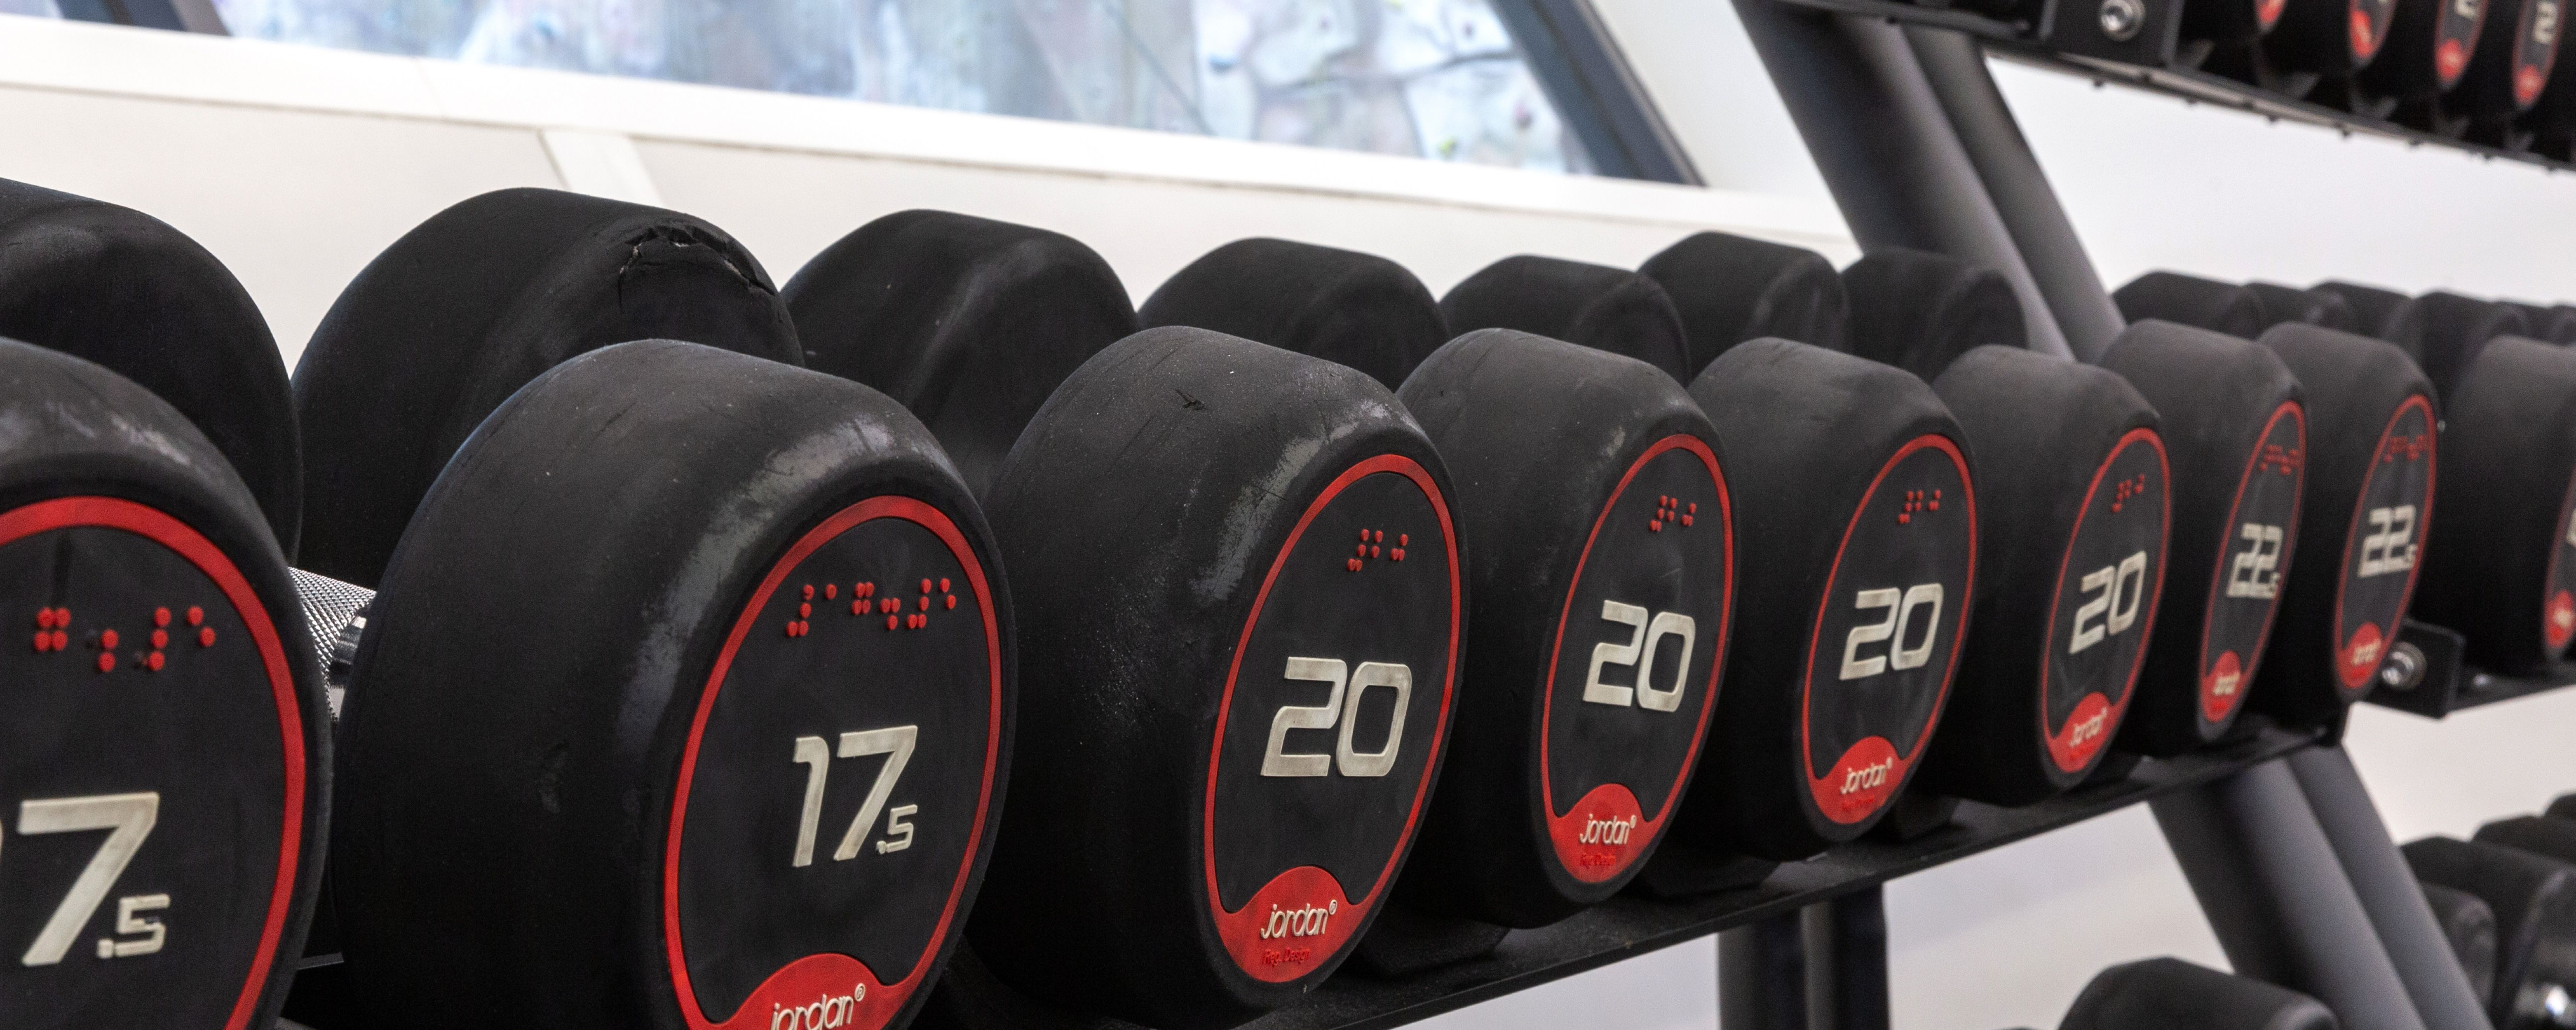 Close-up of weights at Ethos gym